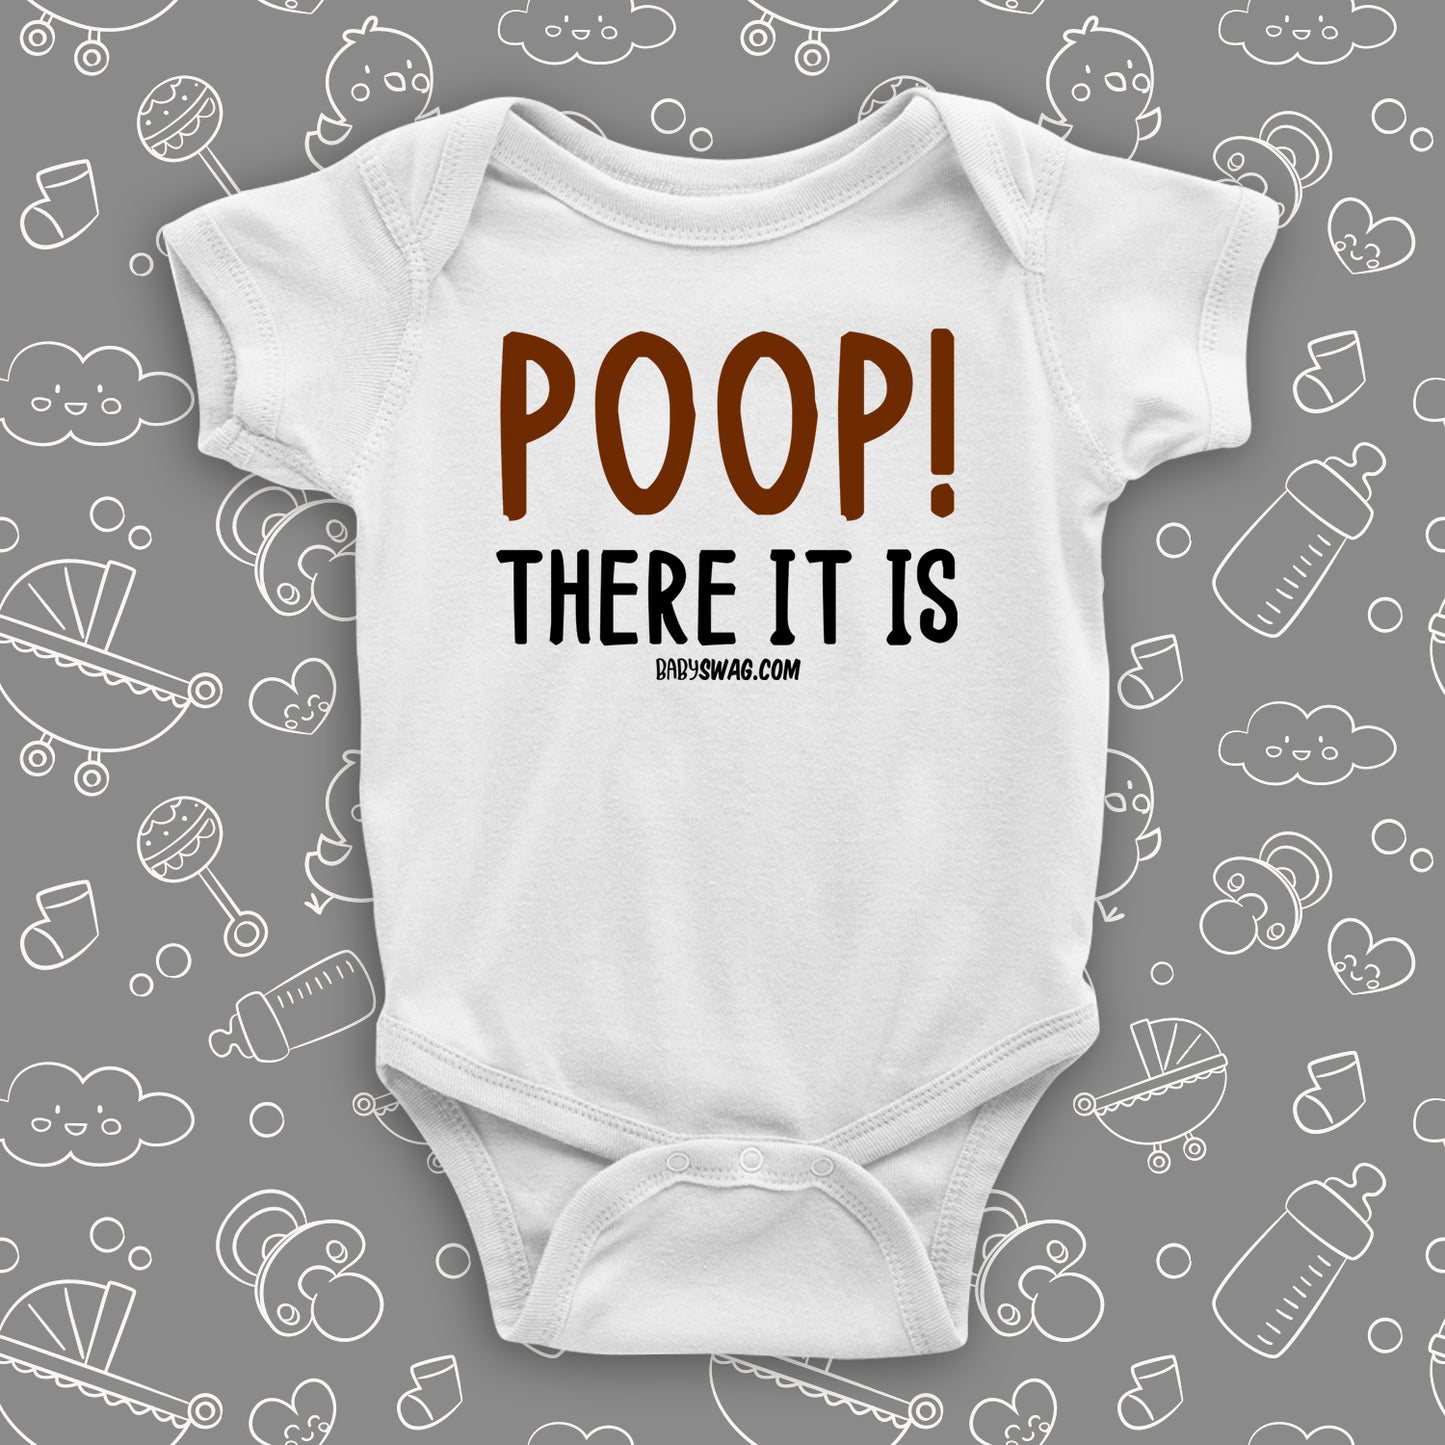 Poop! There It Is